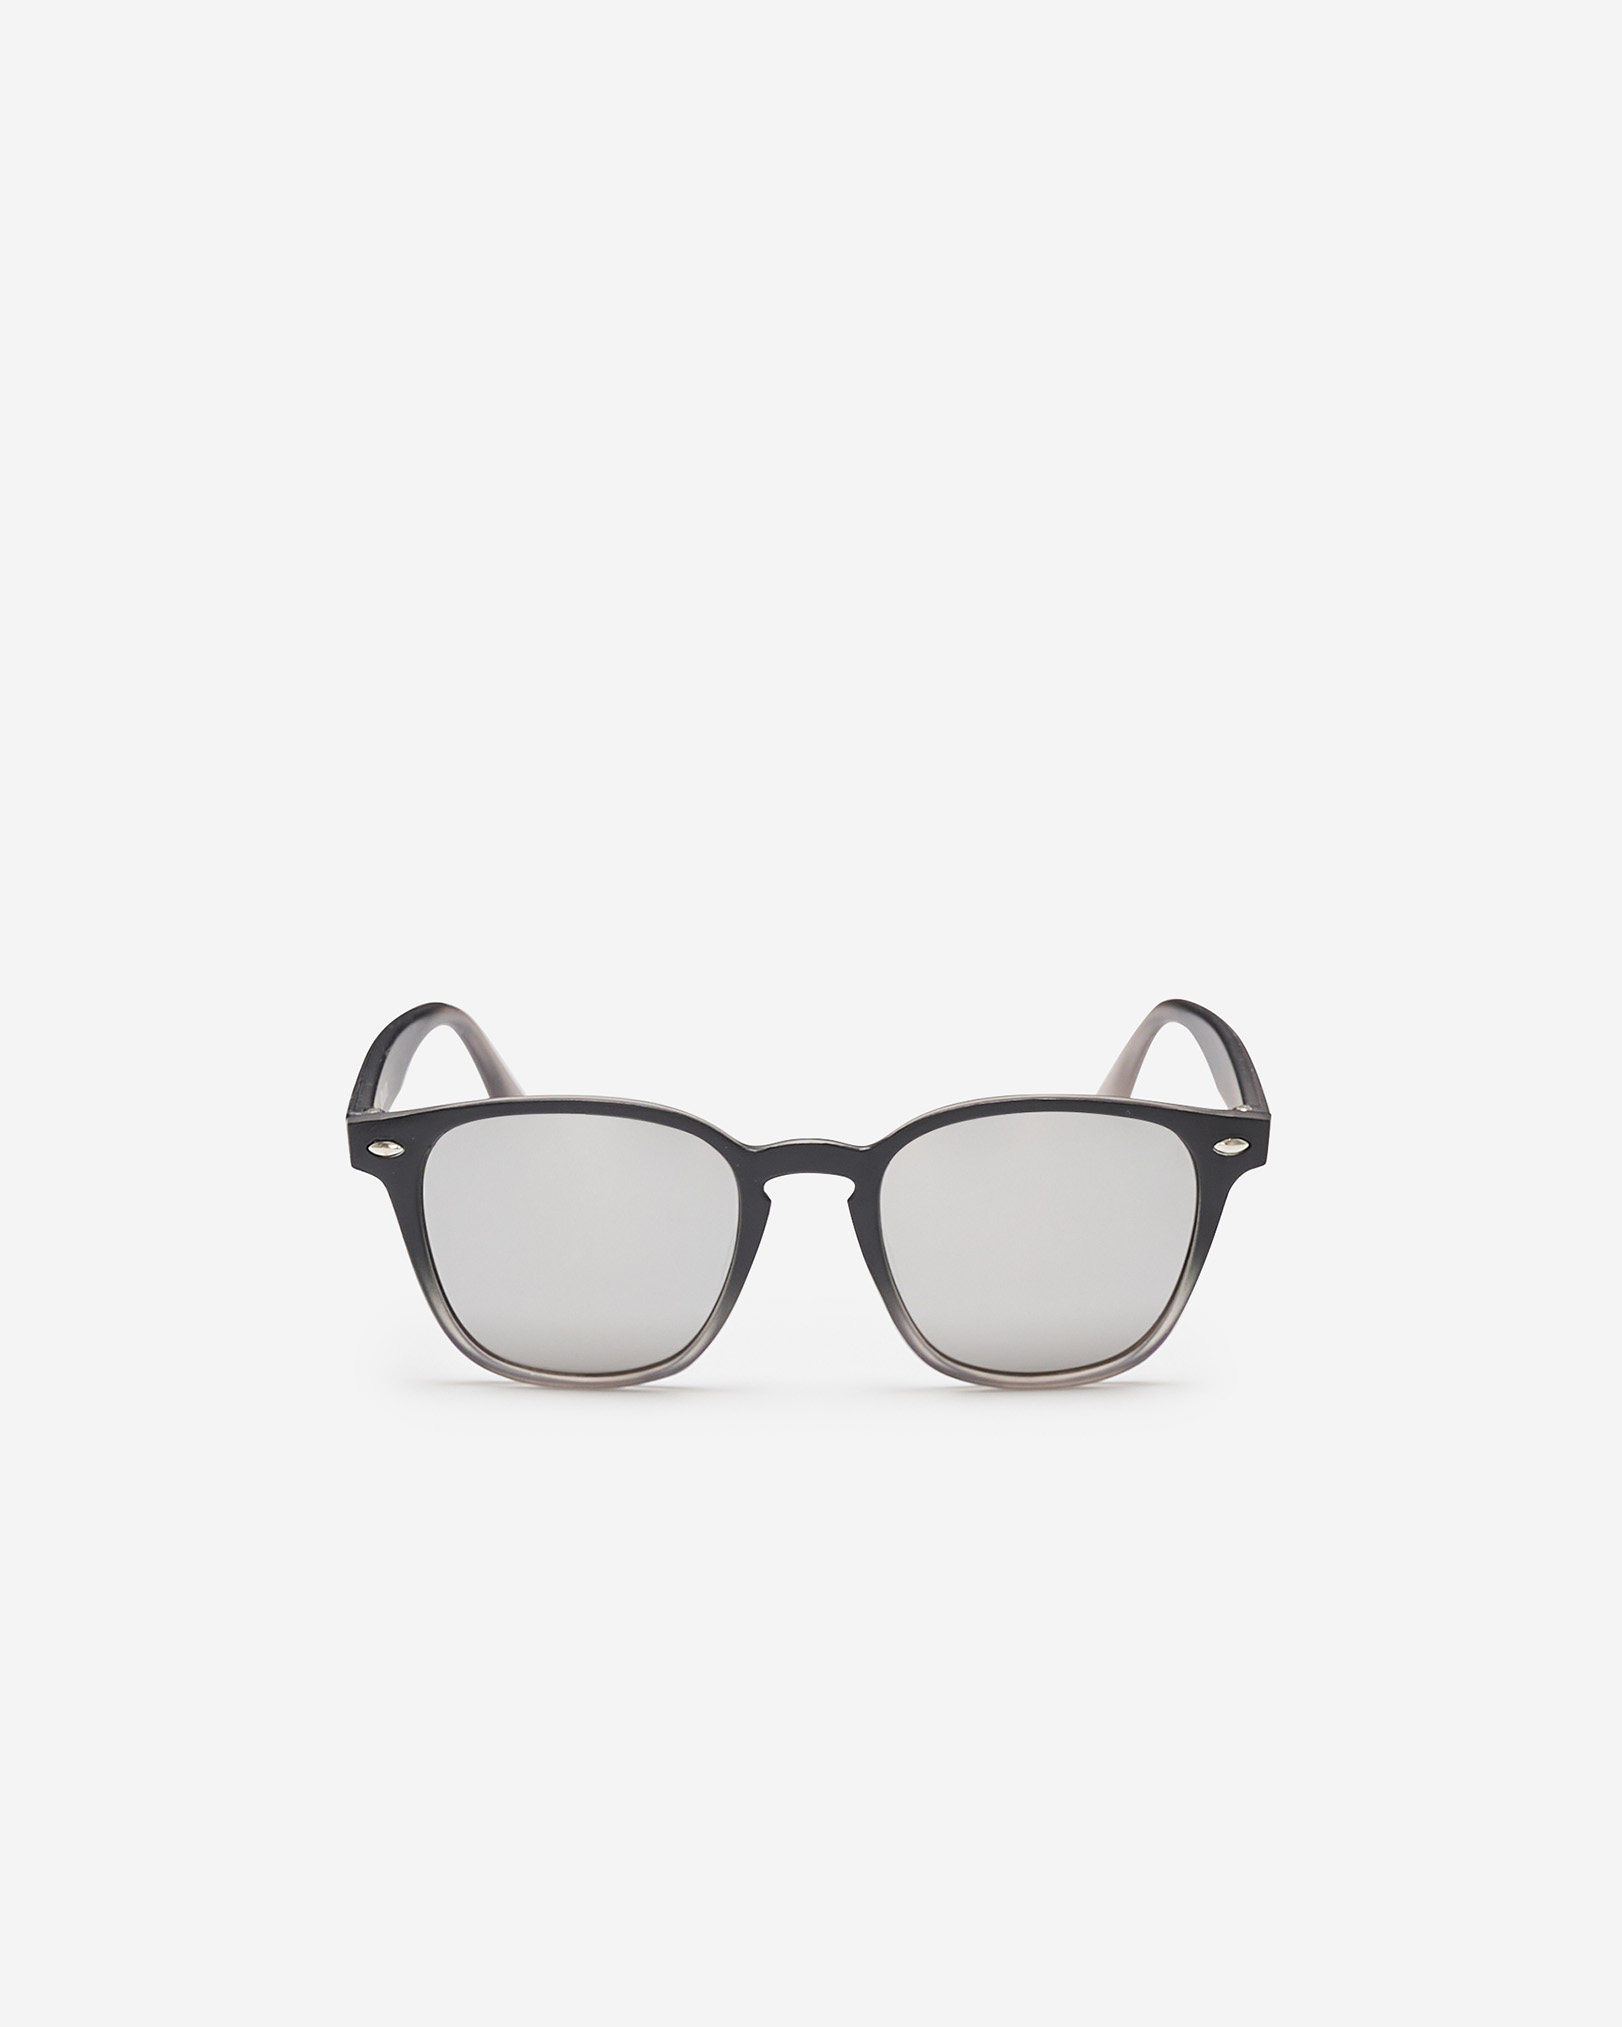 Roots Kids Square Sunglasses in Black